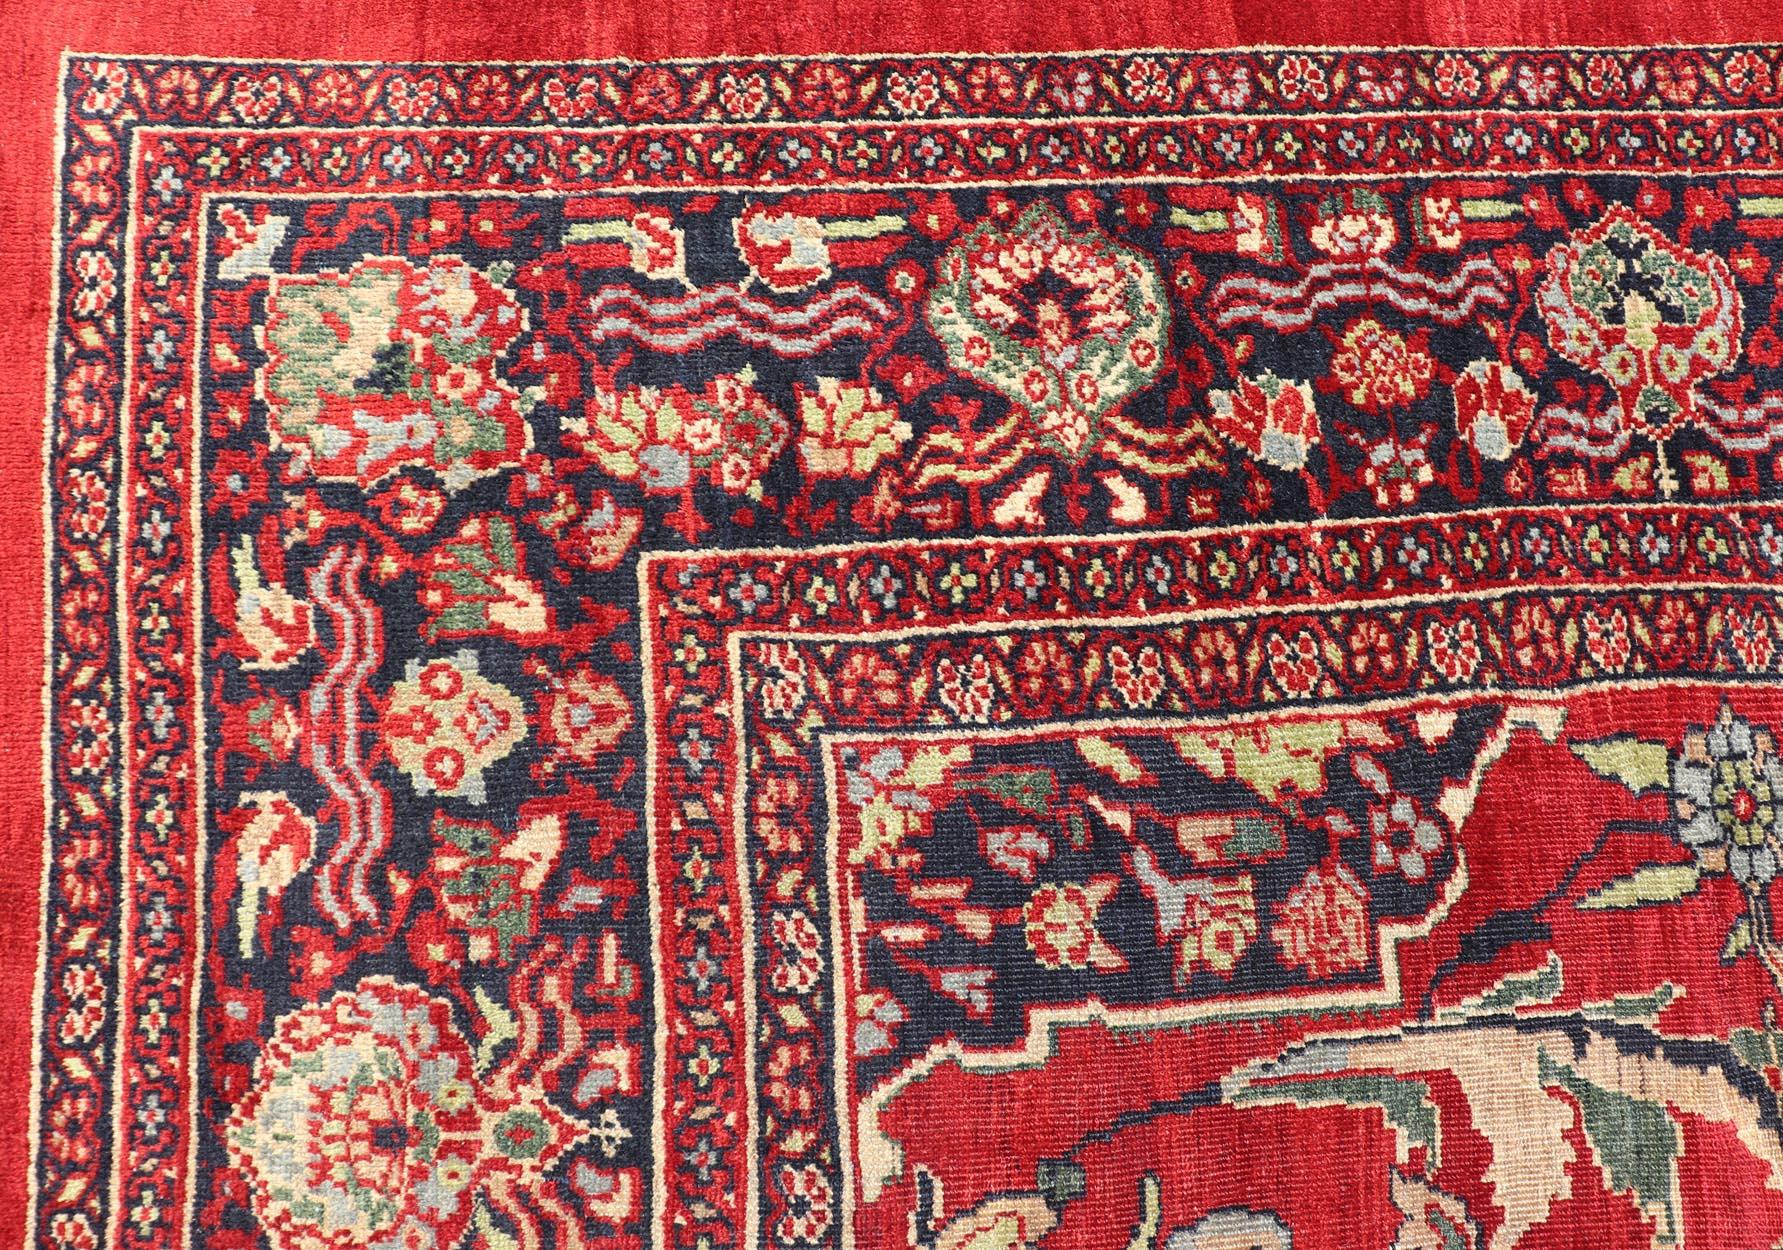 Antique Persian Zeigler Sultanabad Rug with Botanical Elements Set on Red Field For Sale 6